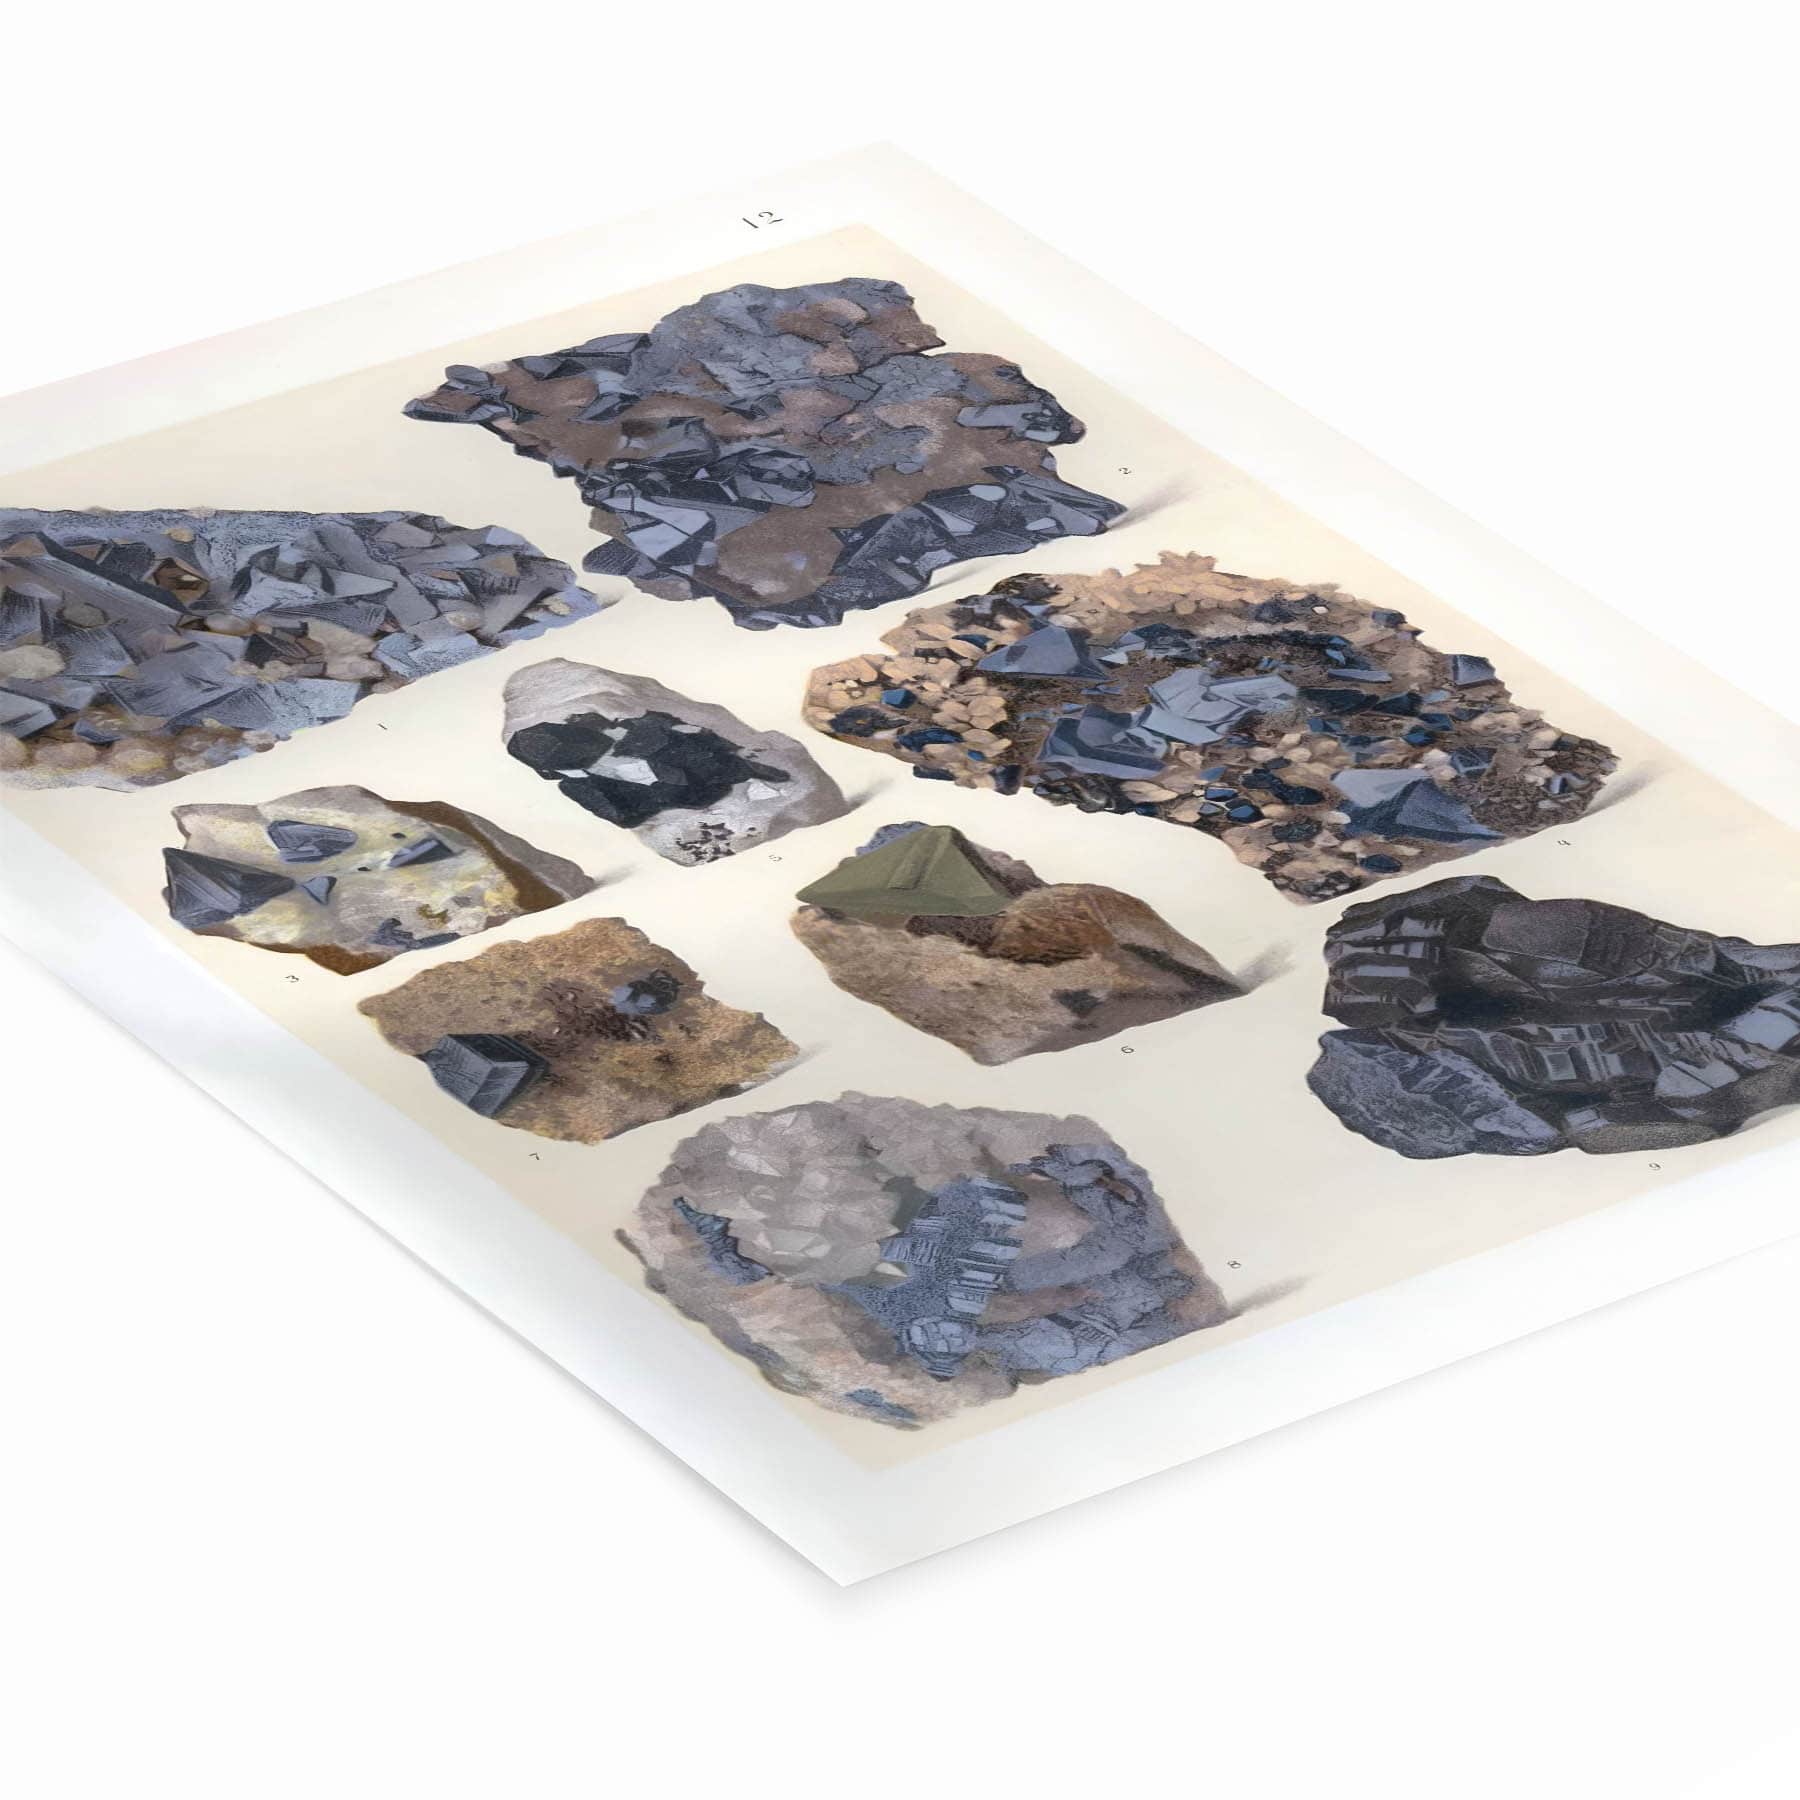 Vintage Rocks and Crystals Art Print Laying Flat on a White Background